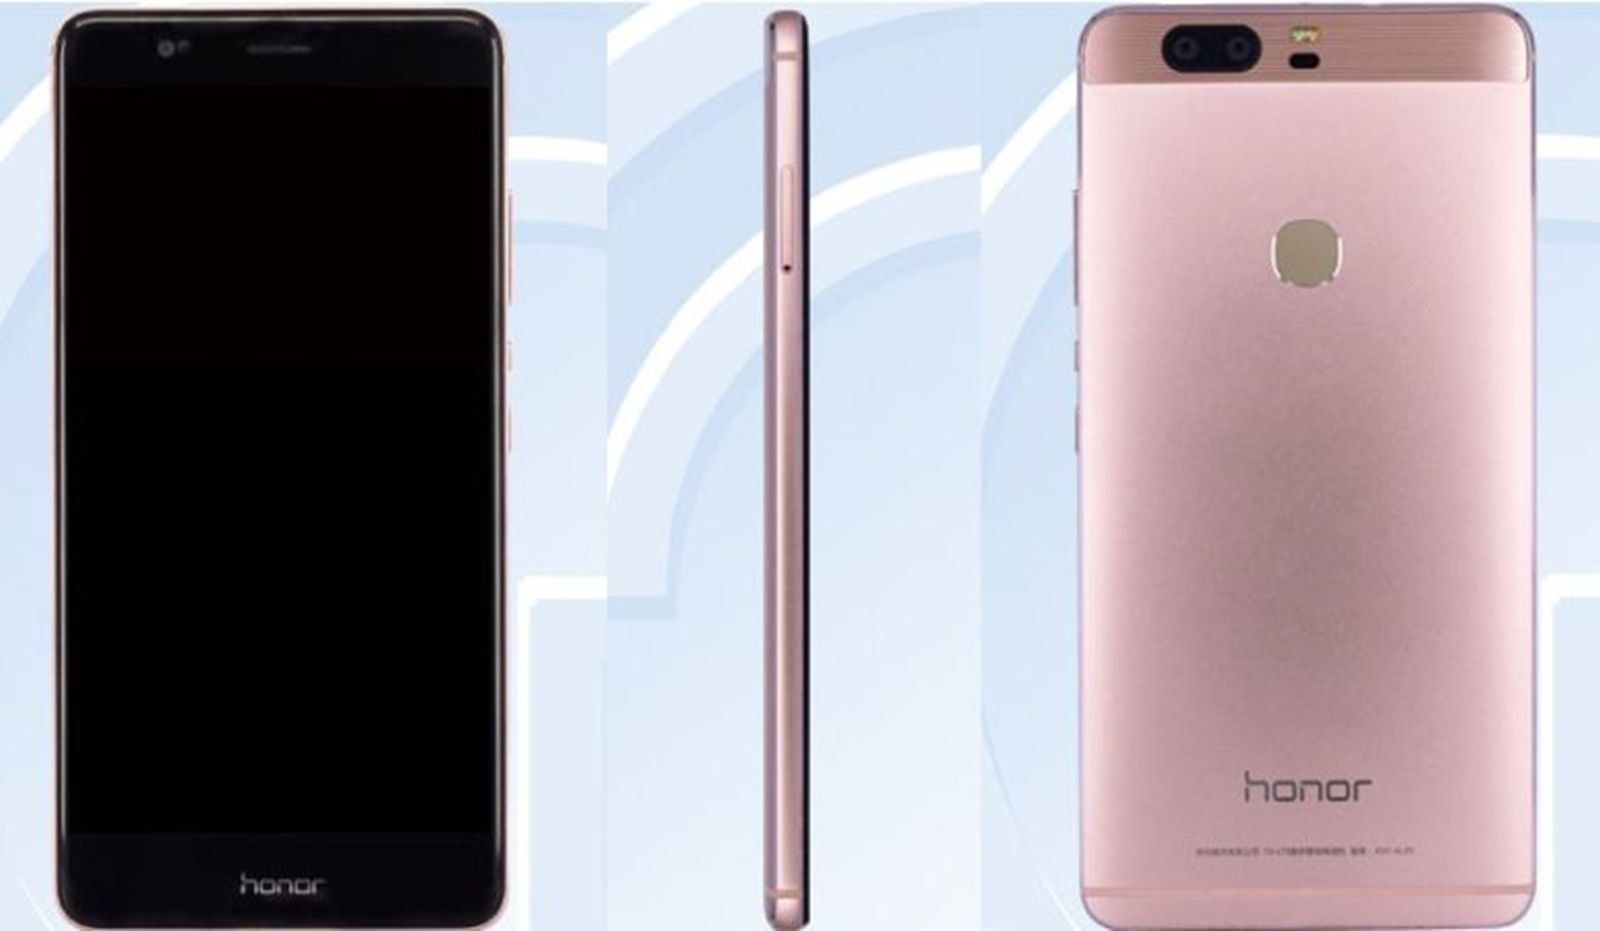 honor v8 flagship leaks with huawei p9 duo cameras and qhd display image 1